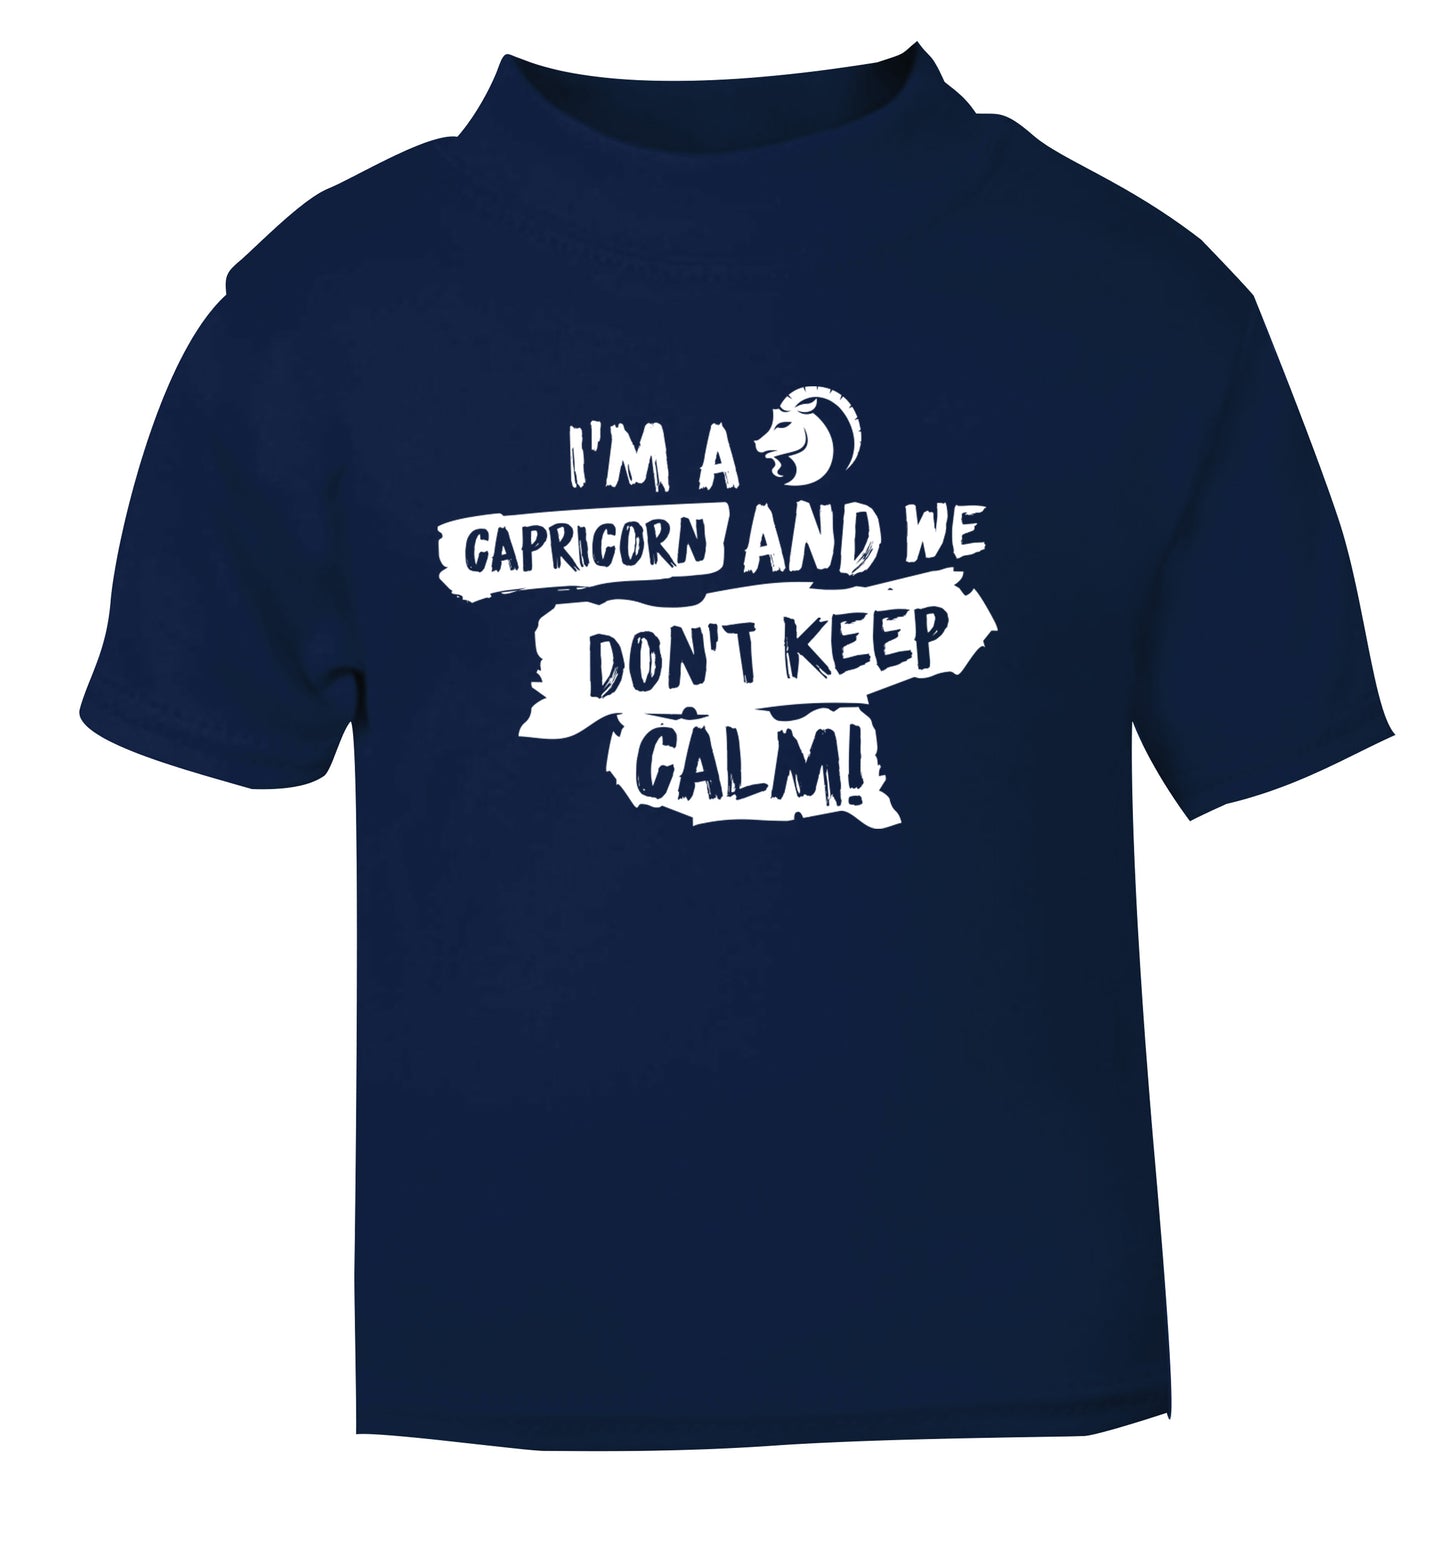 I'm a capricorn and we don't keep calm navy Baby Toddler Tshirt 2 Years